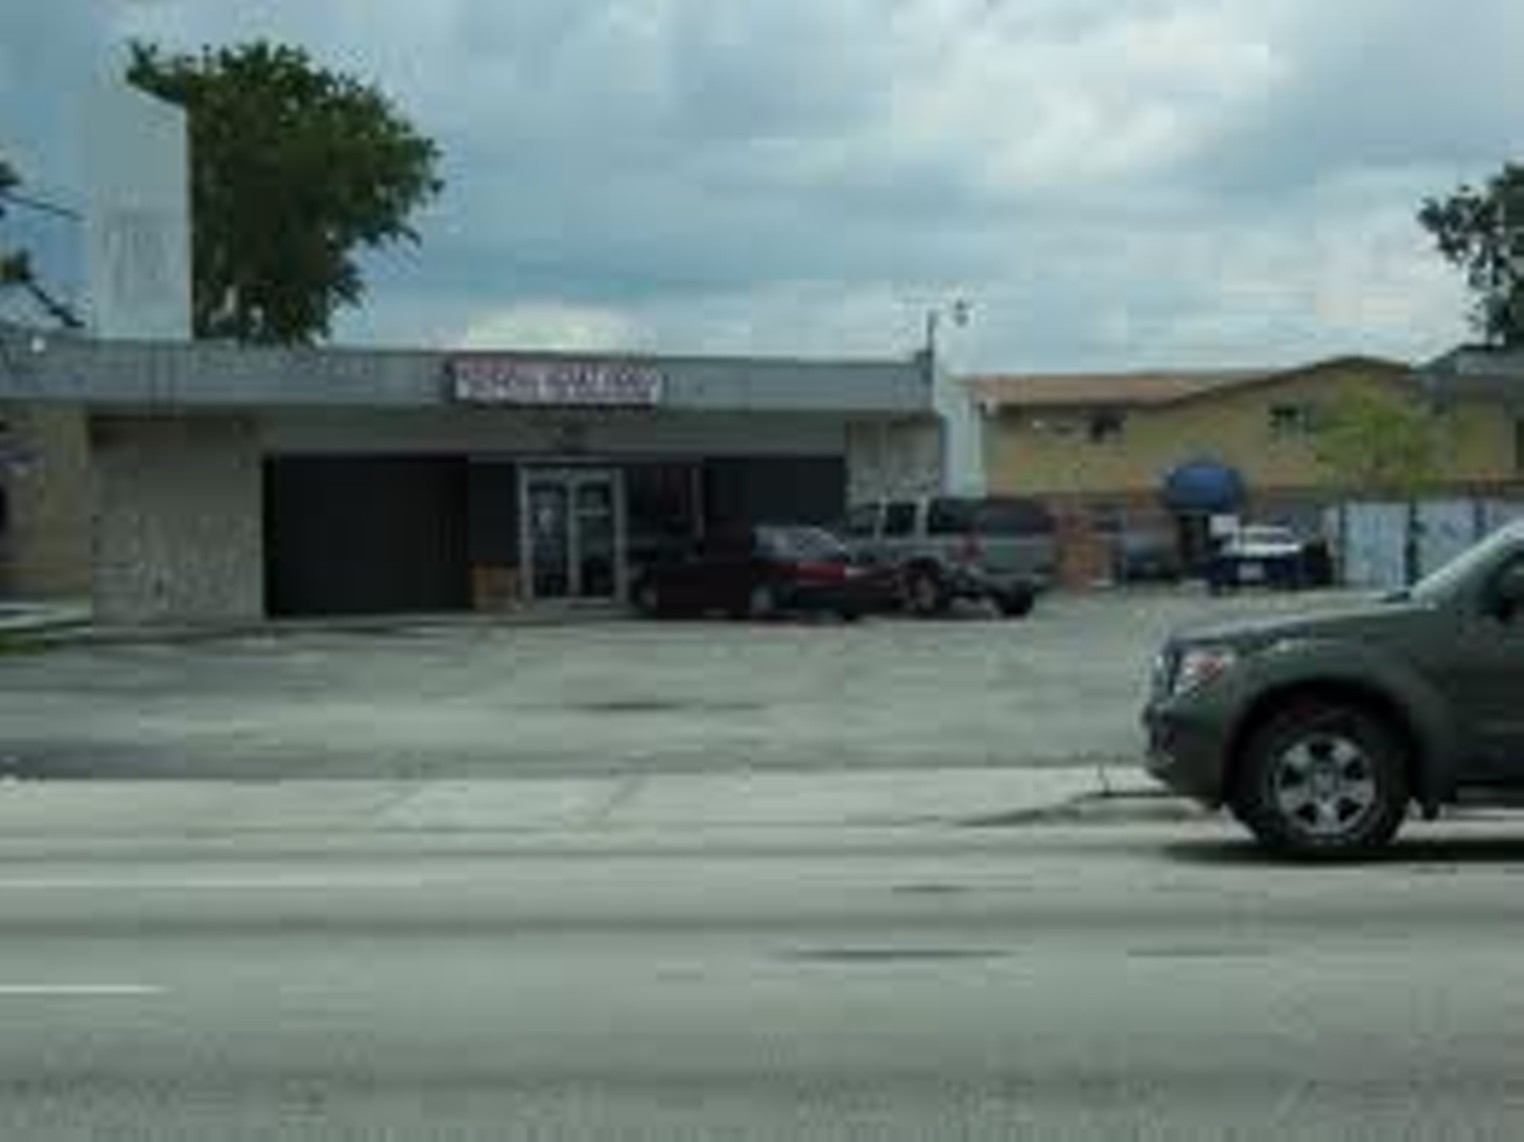 Best Adult Video Store 2008 Kendall Adult Video Best Restaurants, Bars, Clubs, Music and Stores in Miami Miami New Times pic photo